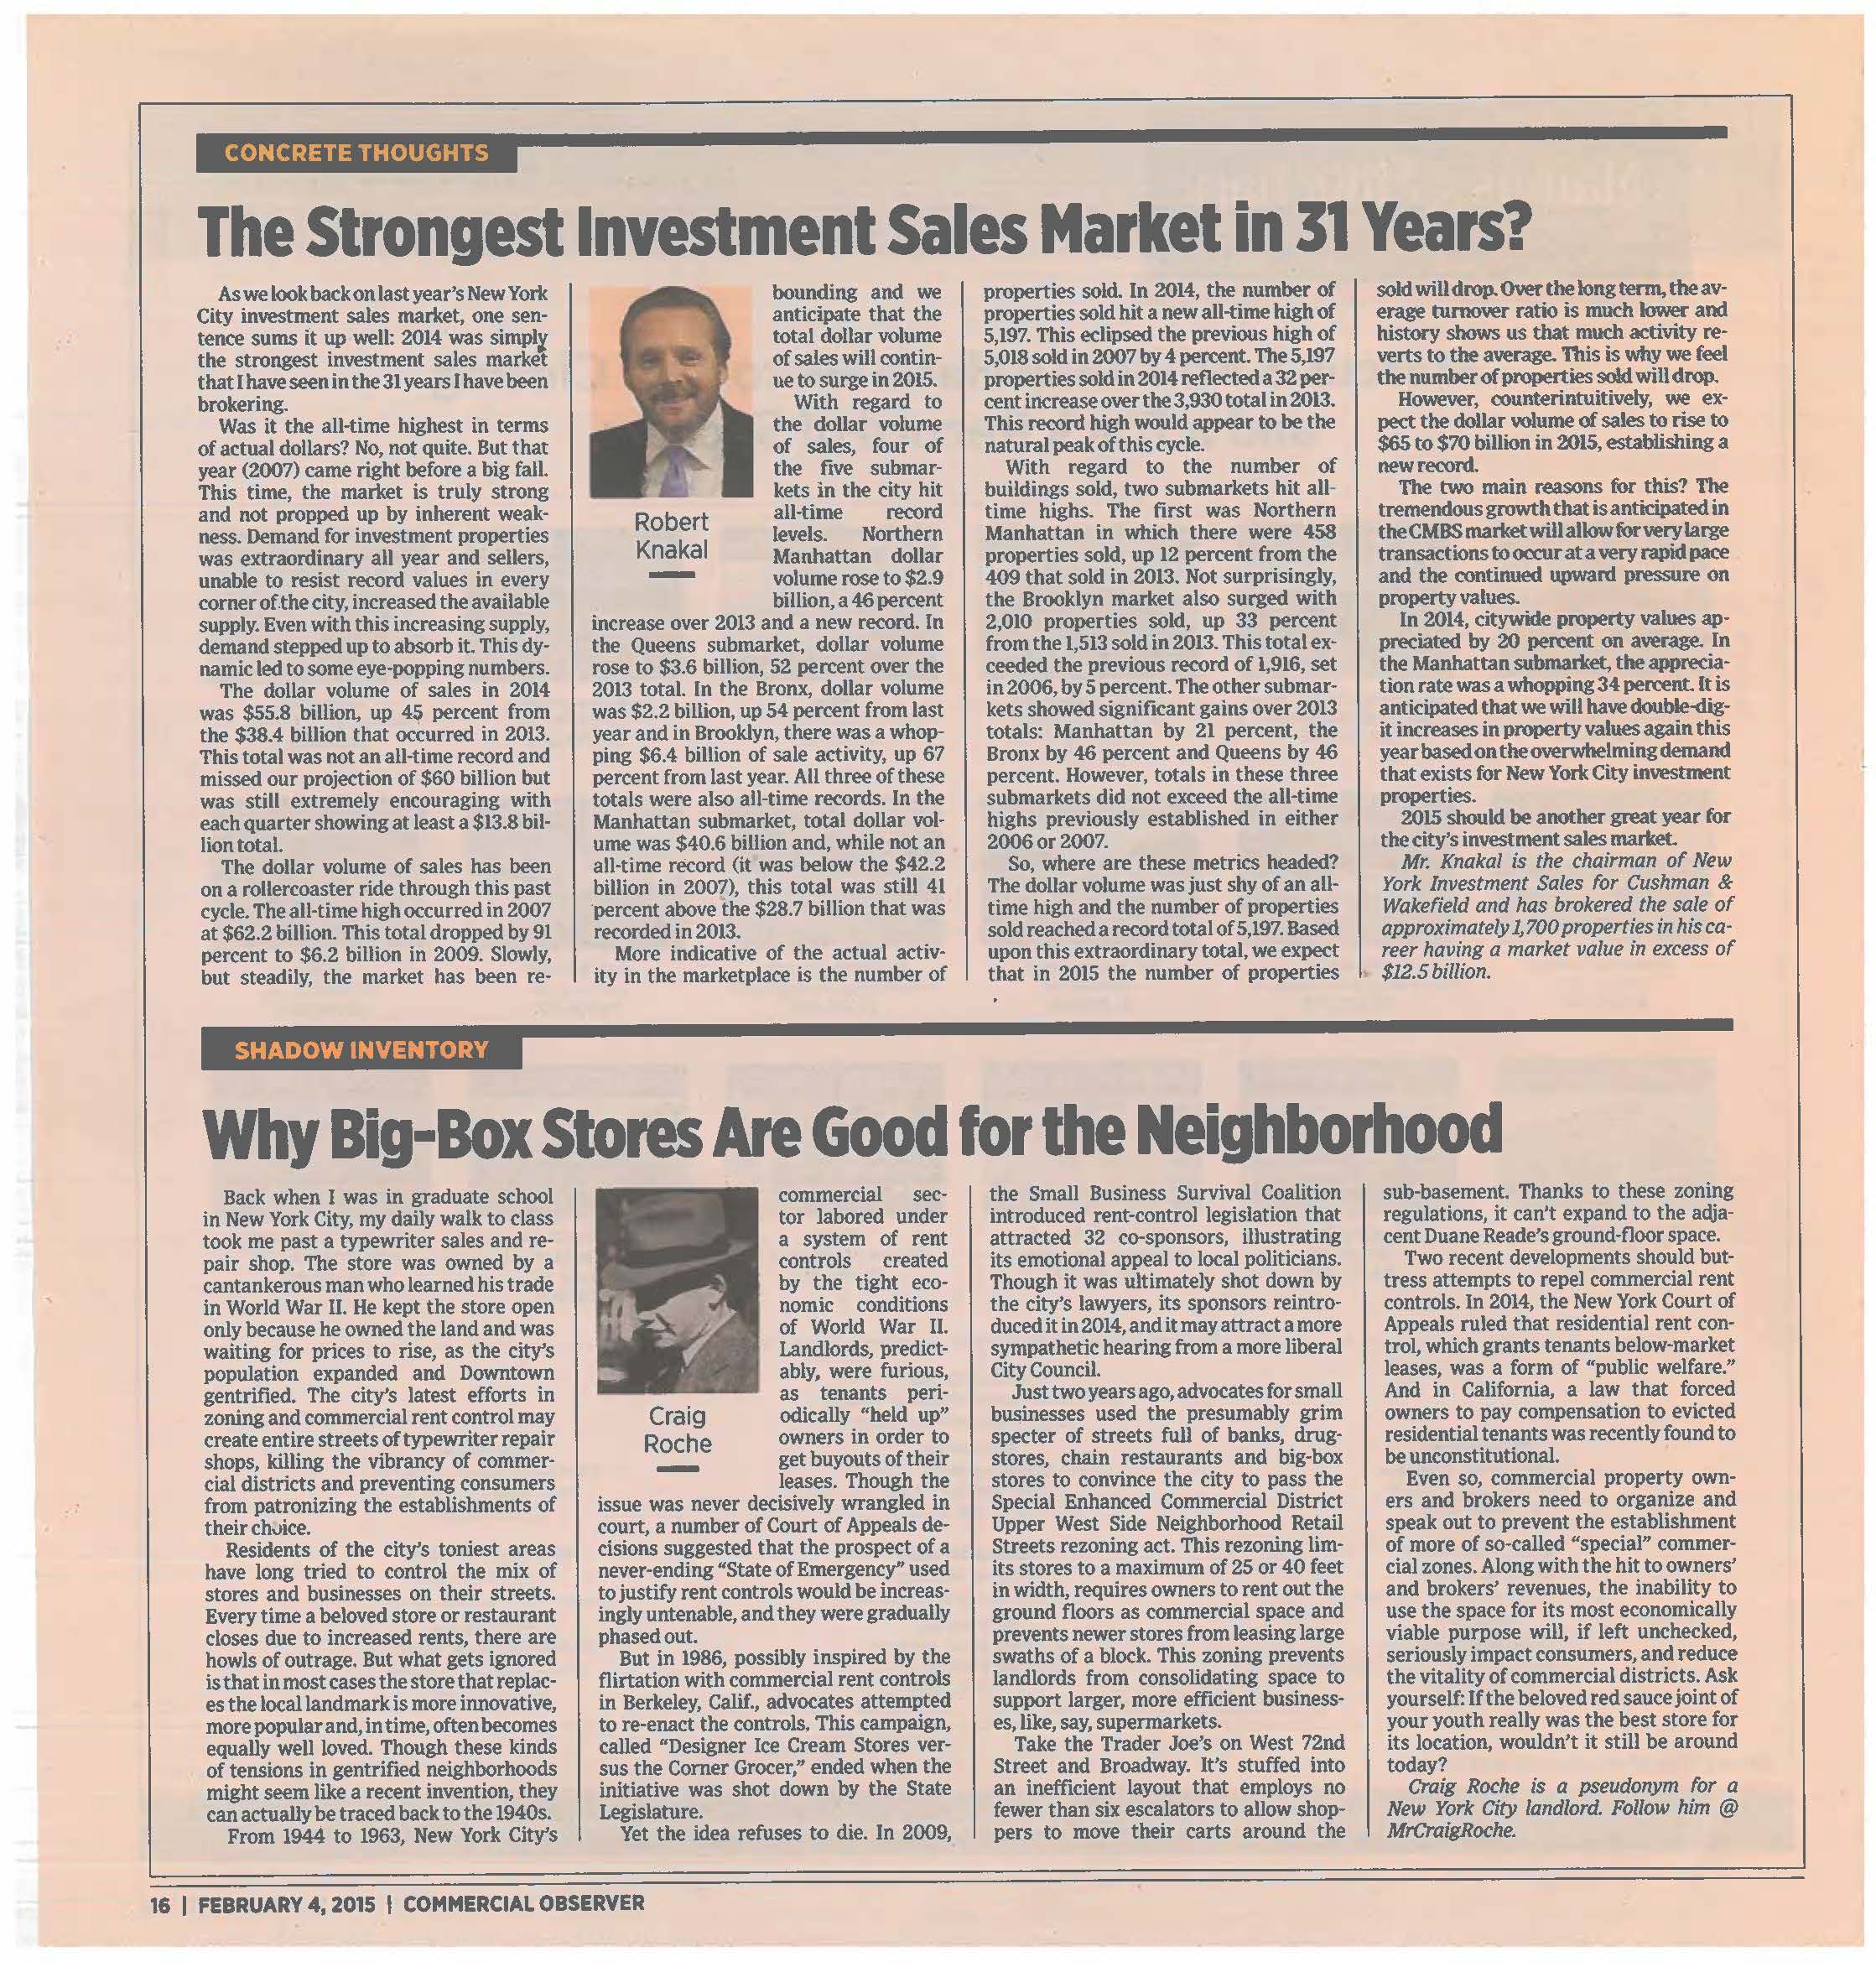 Concrete Thoughts - The Strongest Investment Sales Market in 31 Years - Feb 4 2015